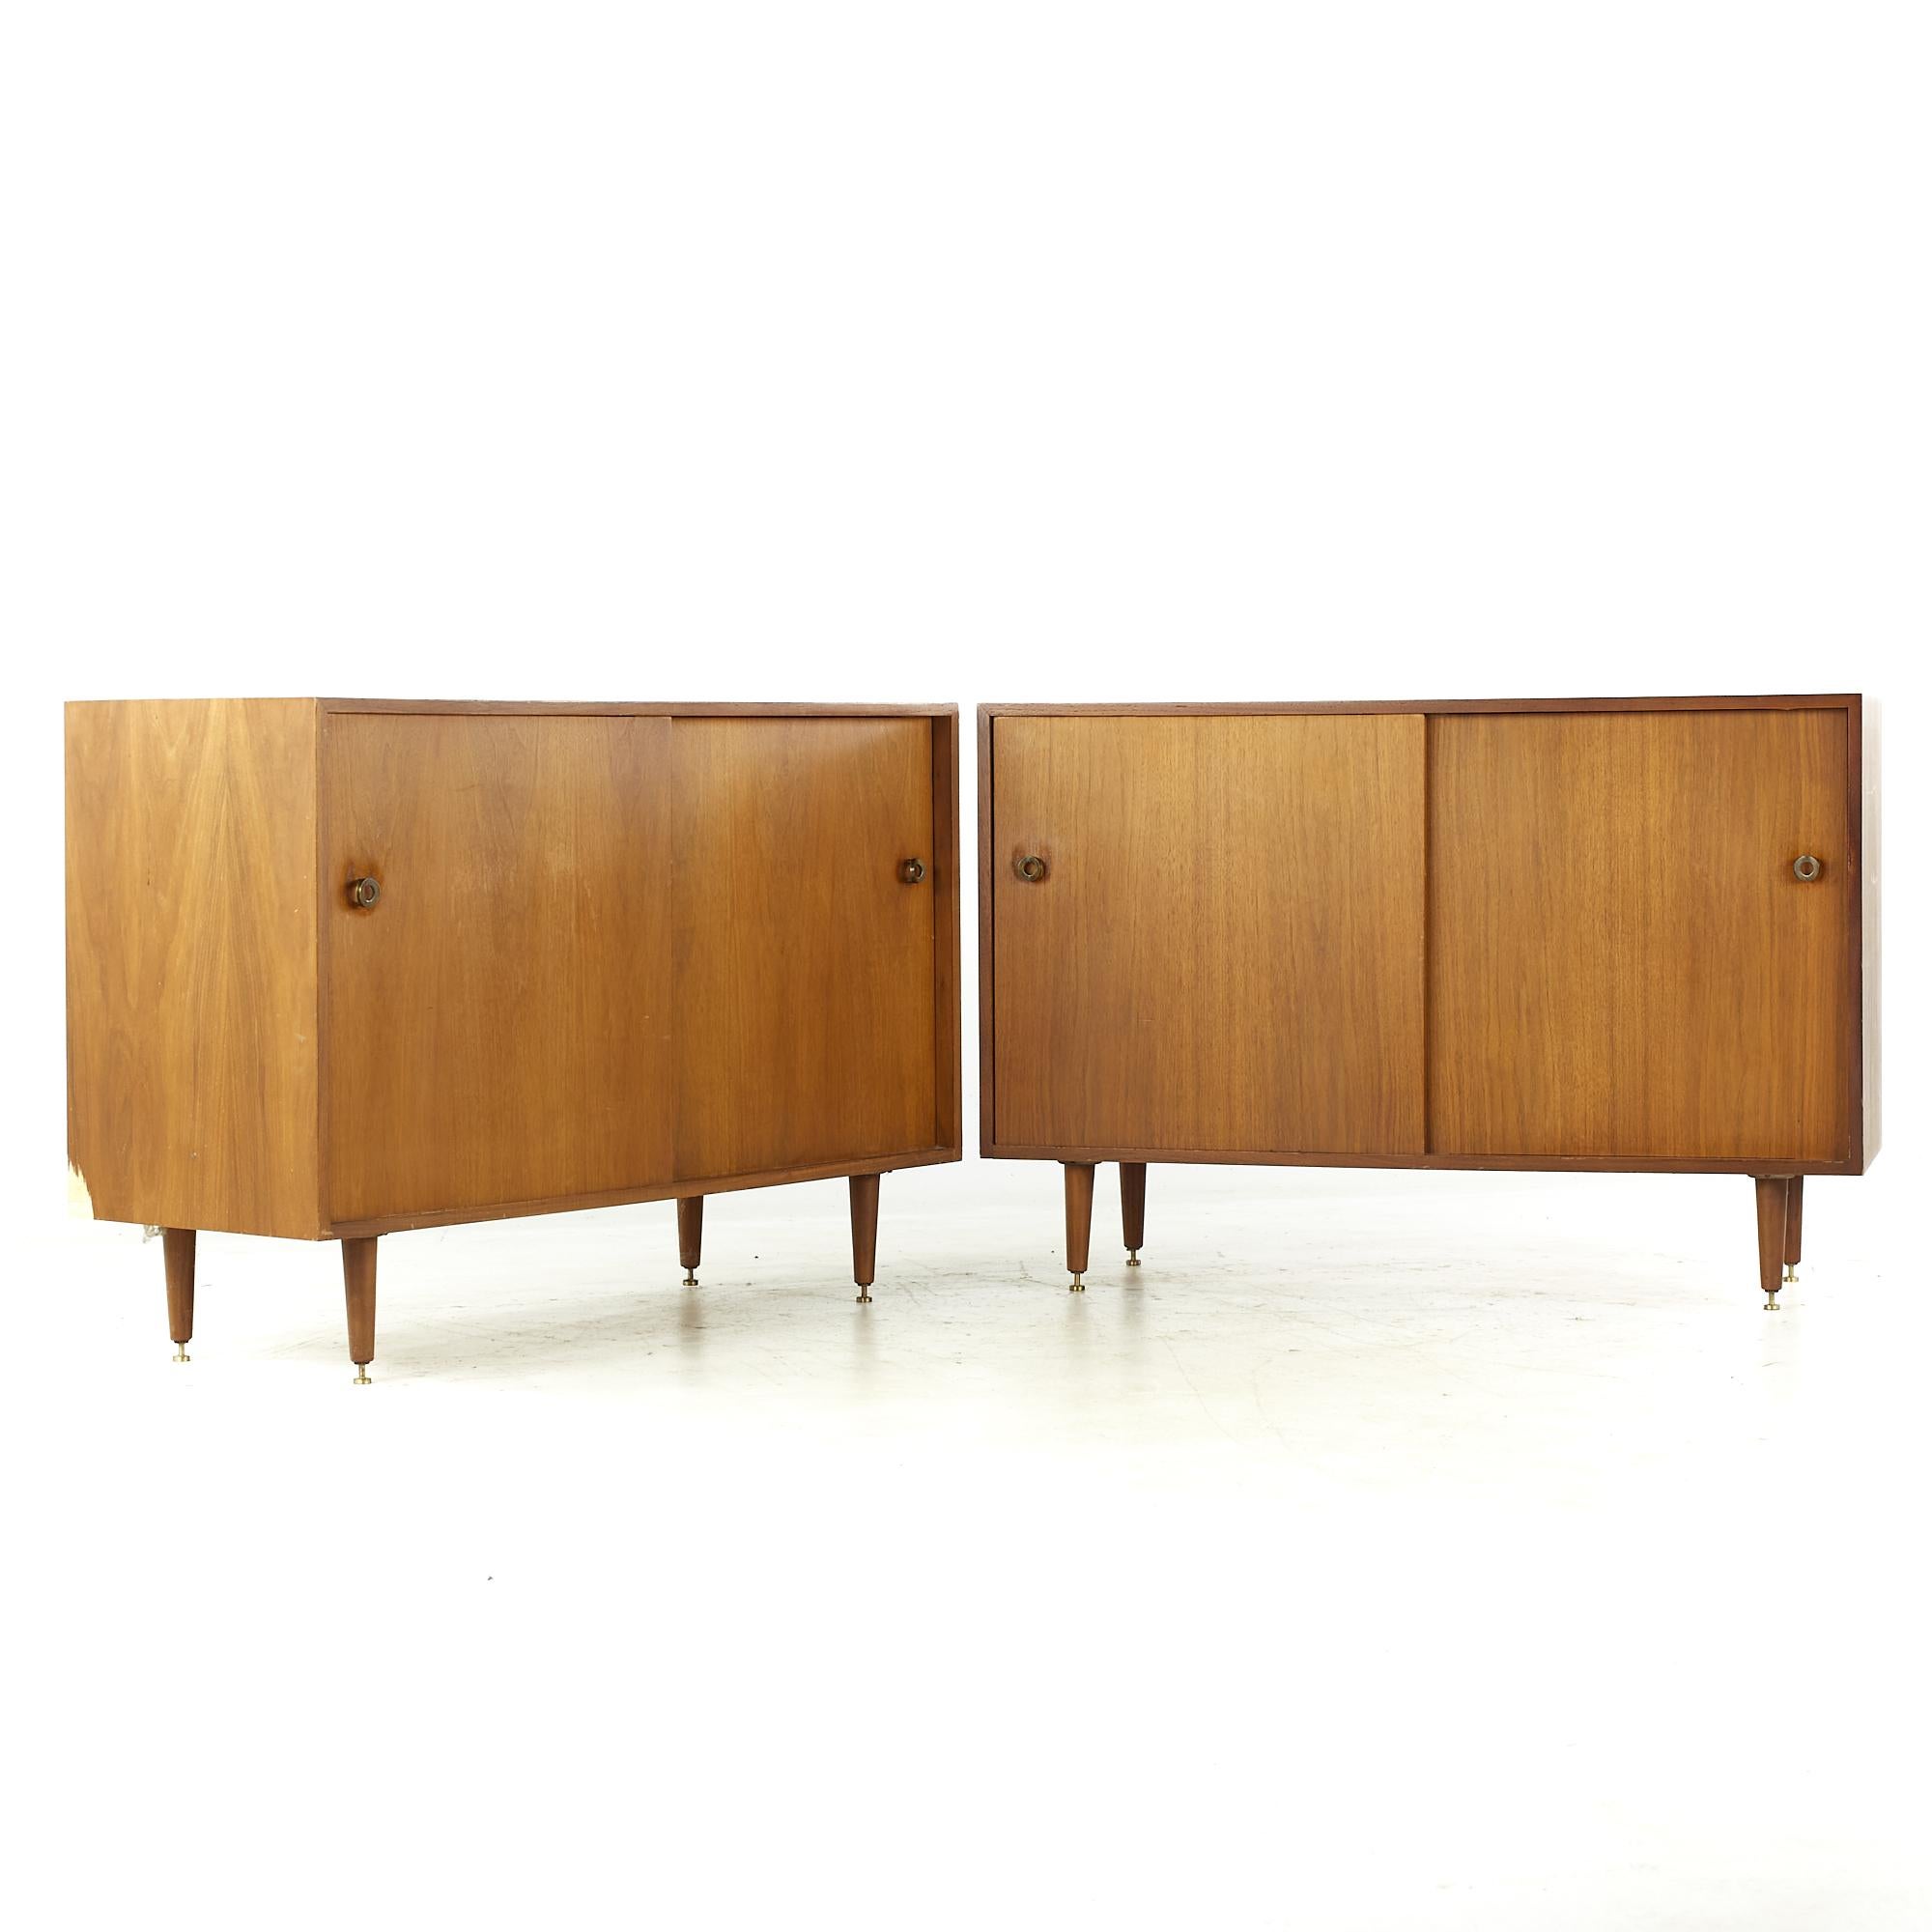 Milo Baughman for Glenn of California midcentury Credenza - Pair

Each credenza measures: 48 wide x 18 deep x 32.75 inches high

All pieces of furniture can be had in what we call restored vintage condition. That means the piece is restored upon